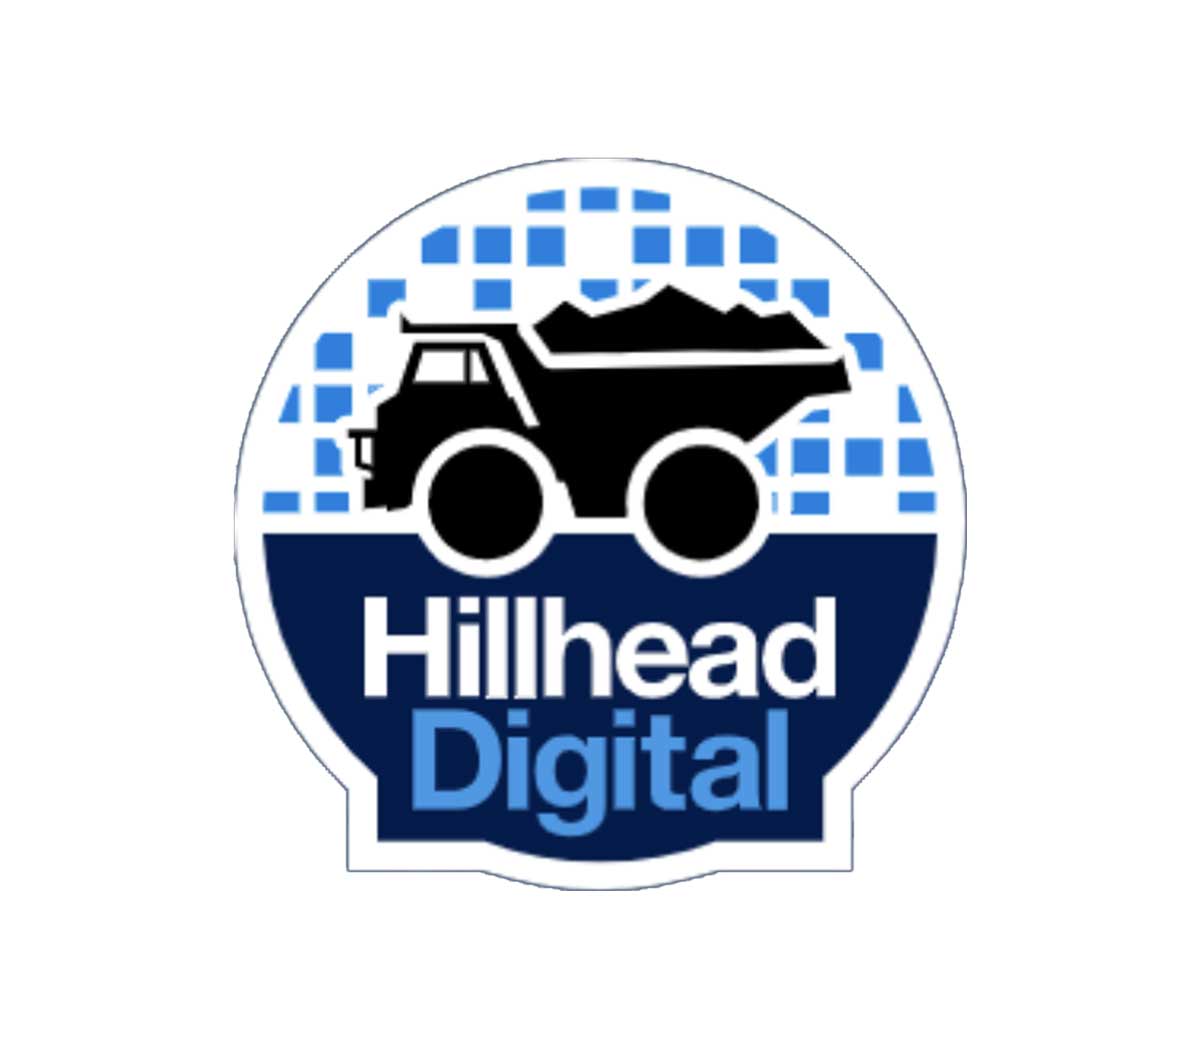 Anaconda to exhibit at the first ever Hillhead Digital